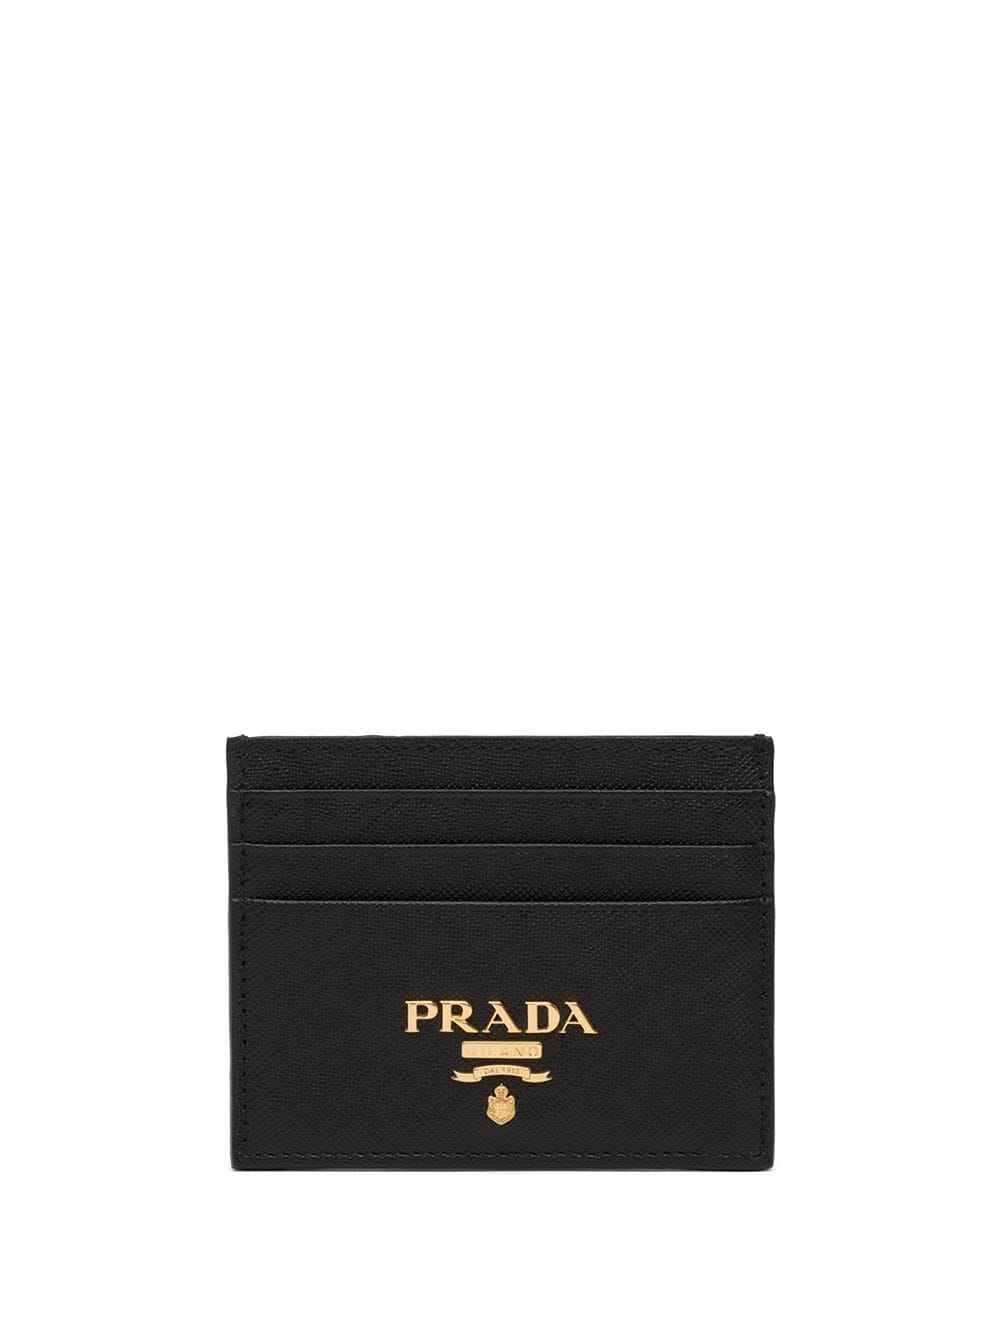 Black calf leather compact front logo cardholder